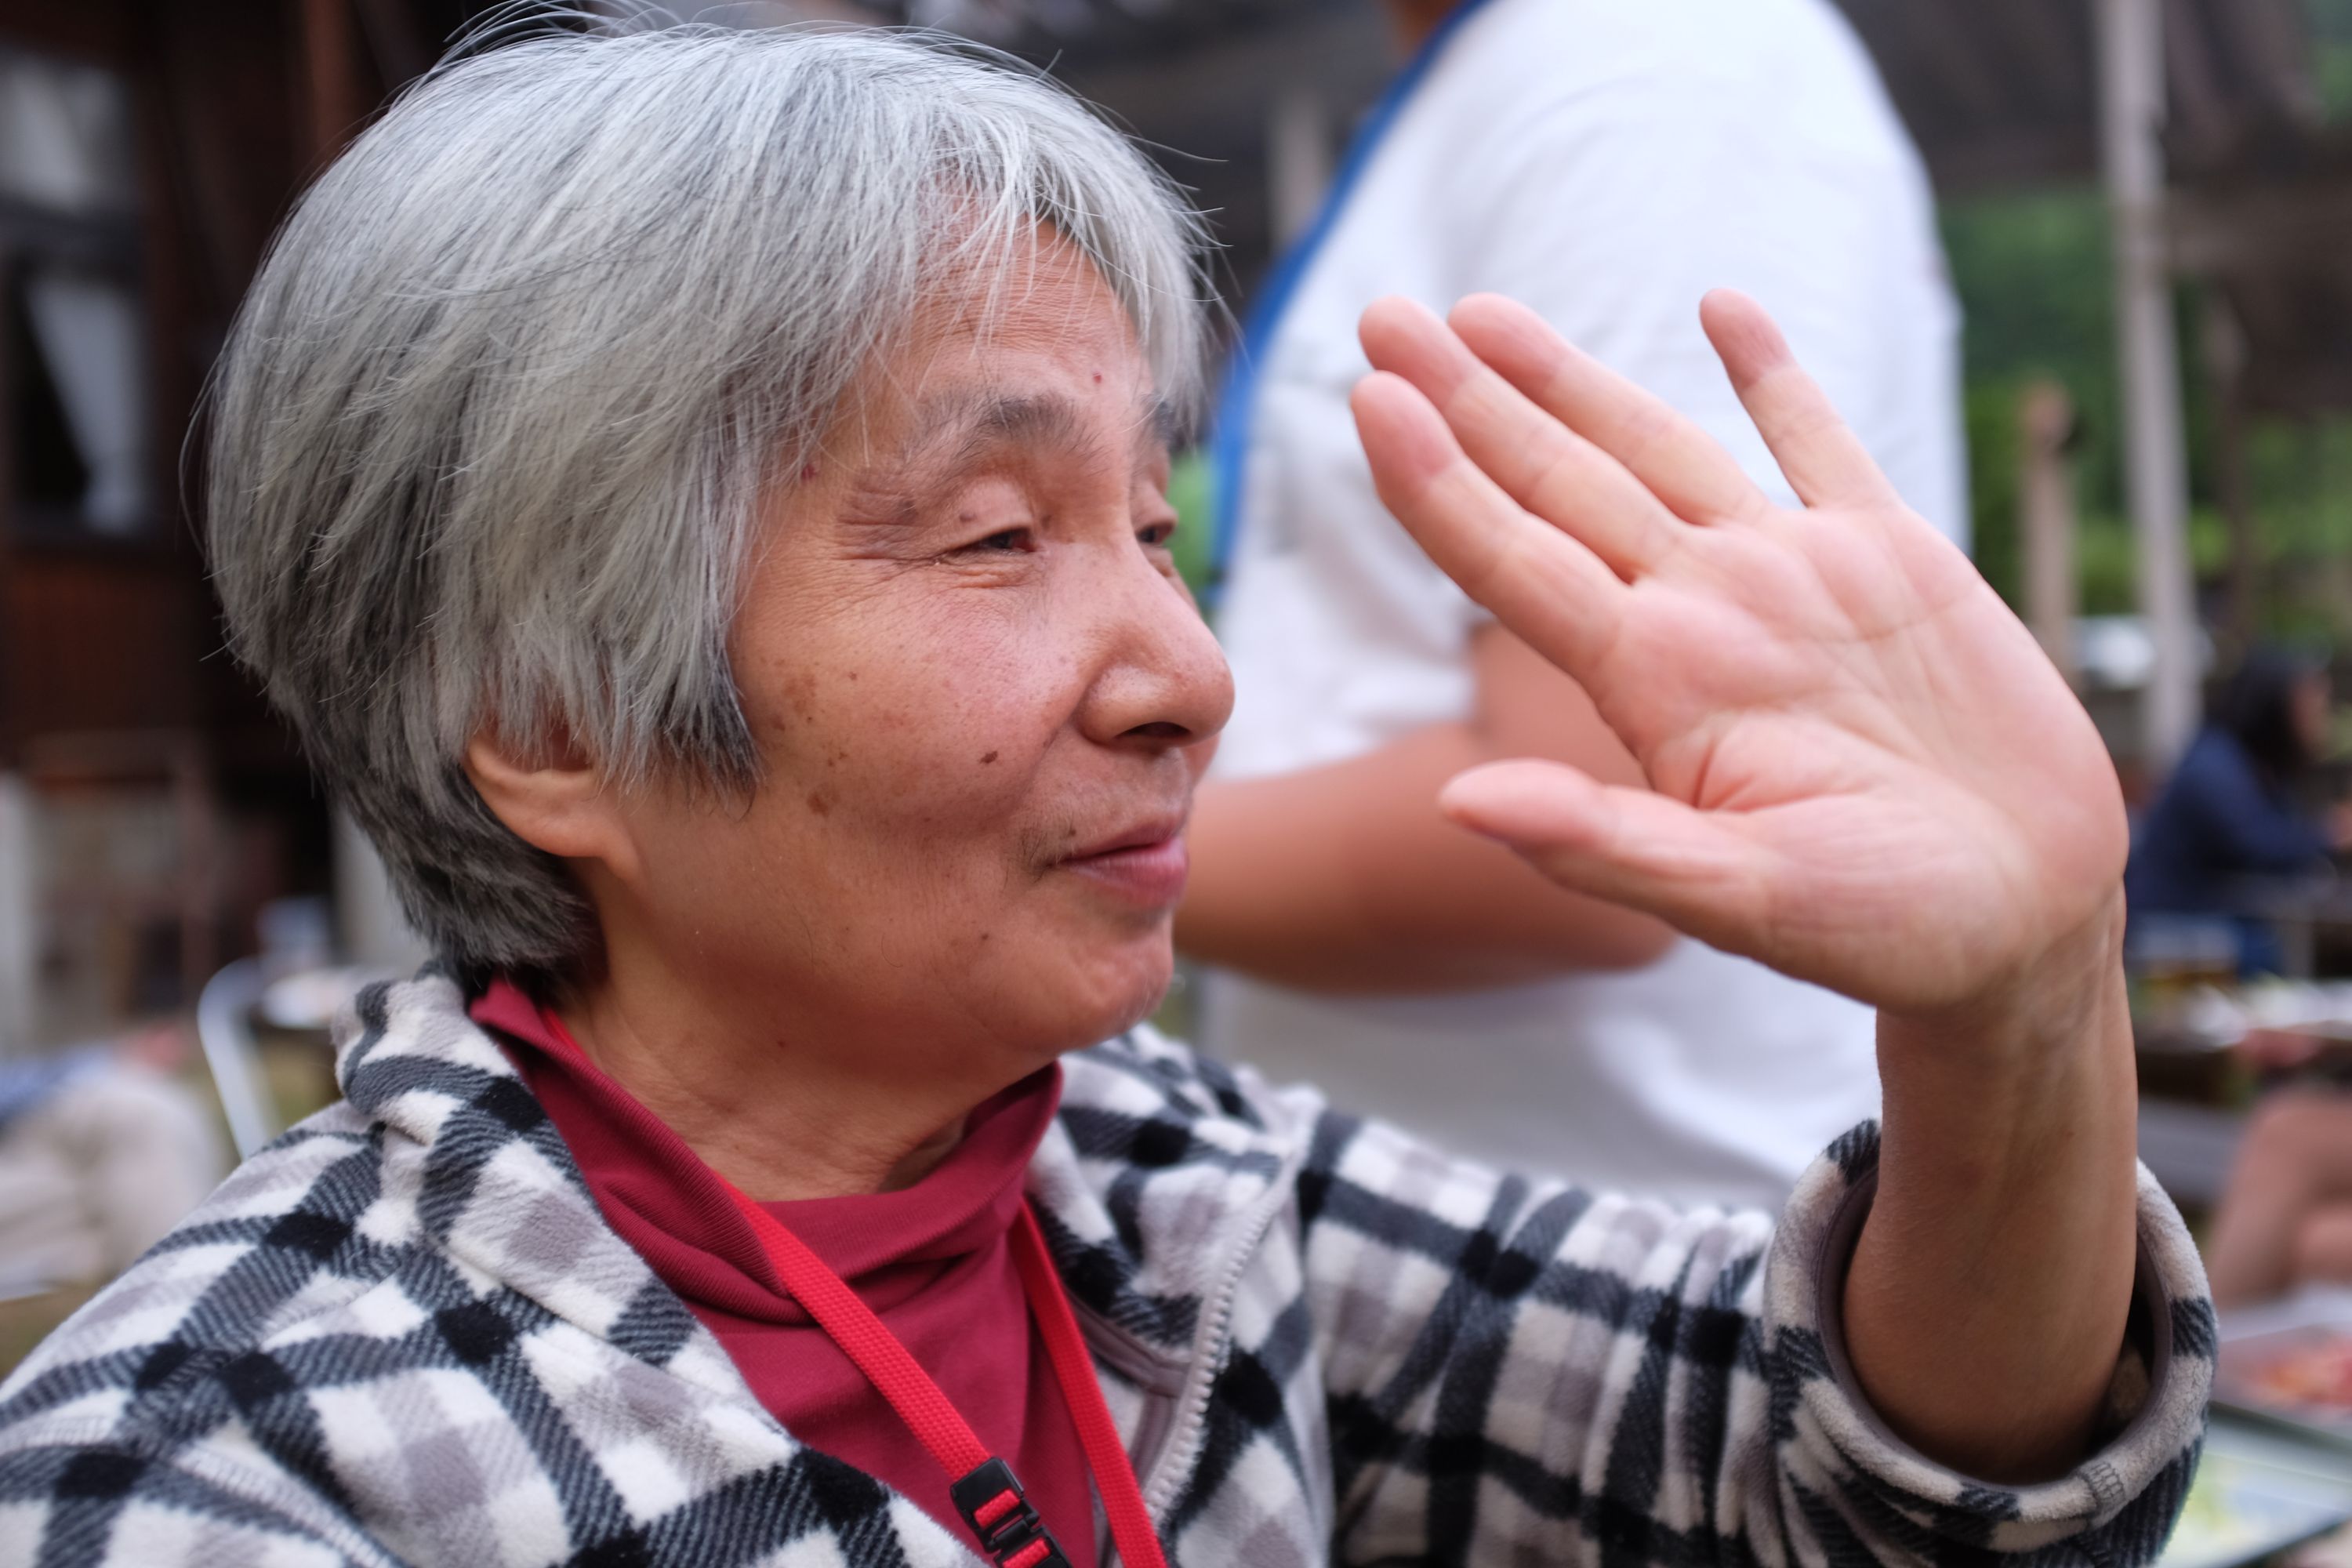 A Japanese woman with short gray hair raises her left hand to wave.